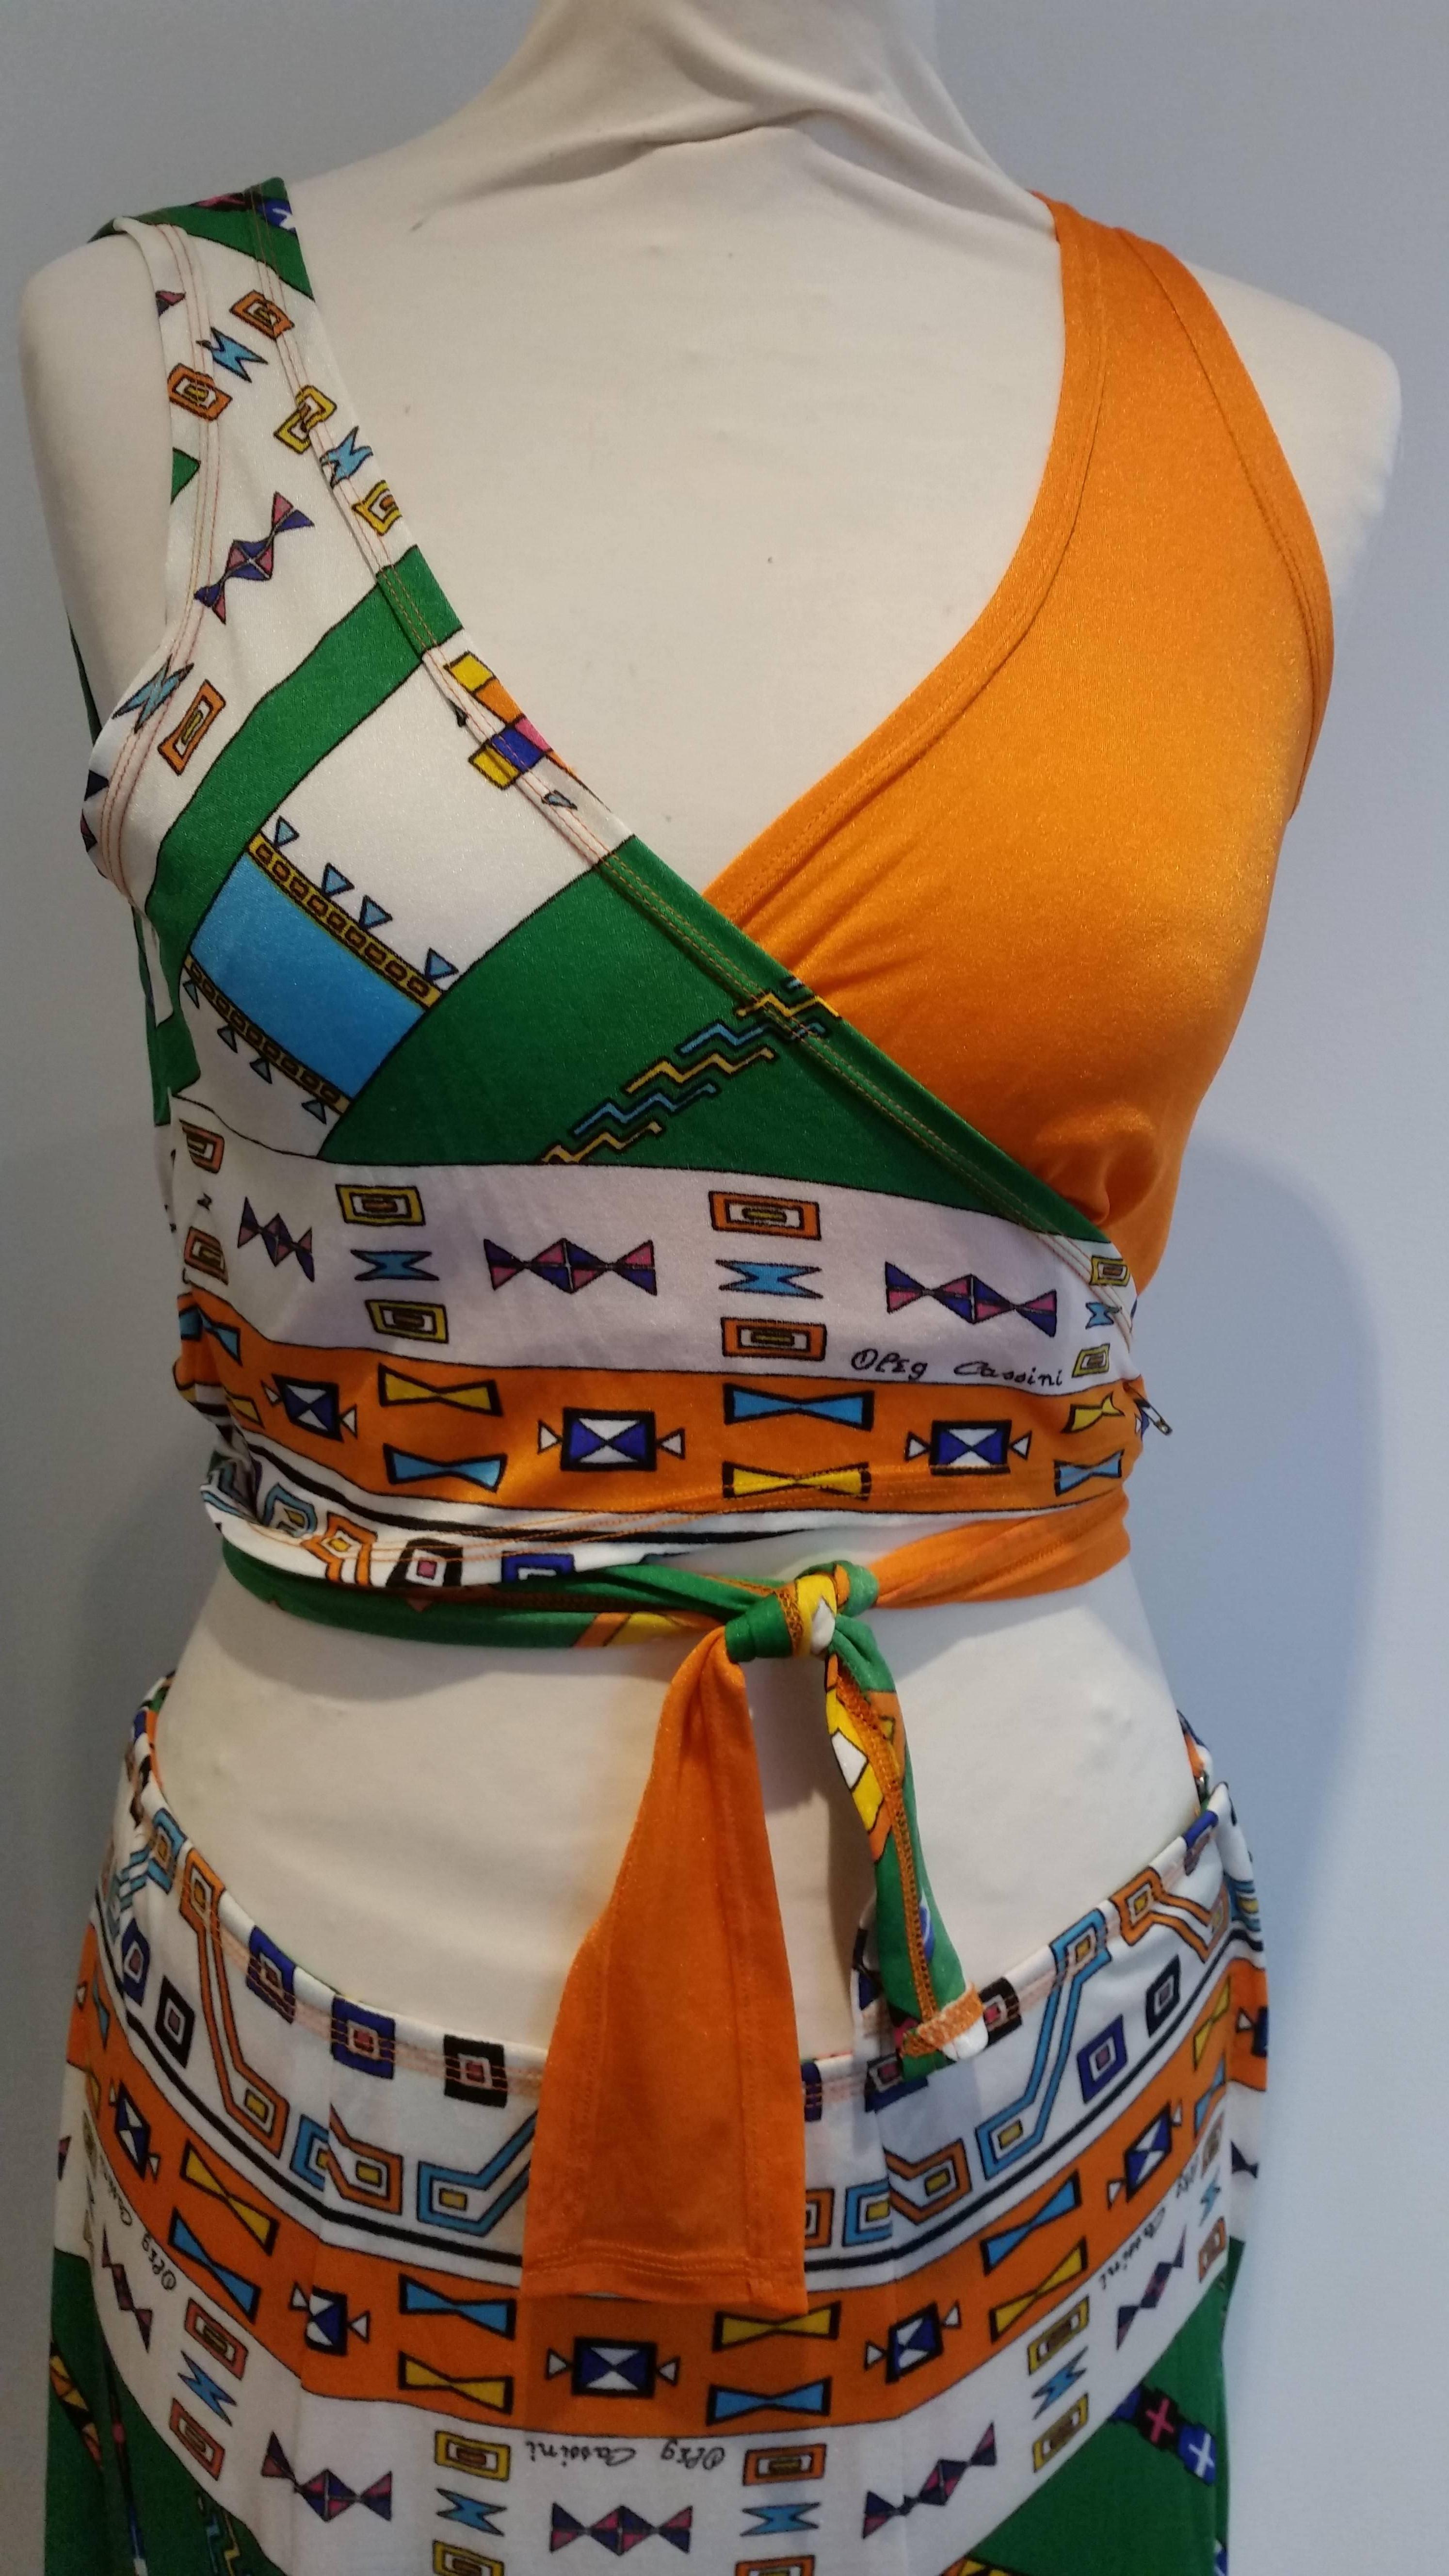 Oleg Cassini Multi Coloured 60's/70's Cropped Top & Maxi Skirt Ensemble In Fair Condition For Sale In Cirencester, Gloucestershire